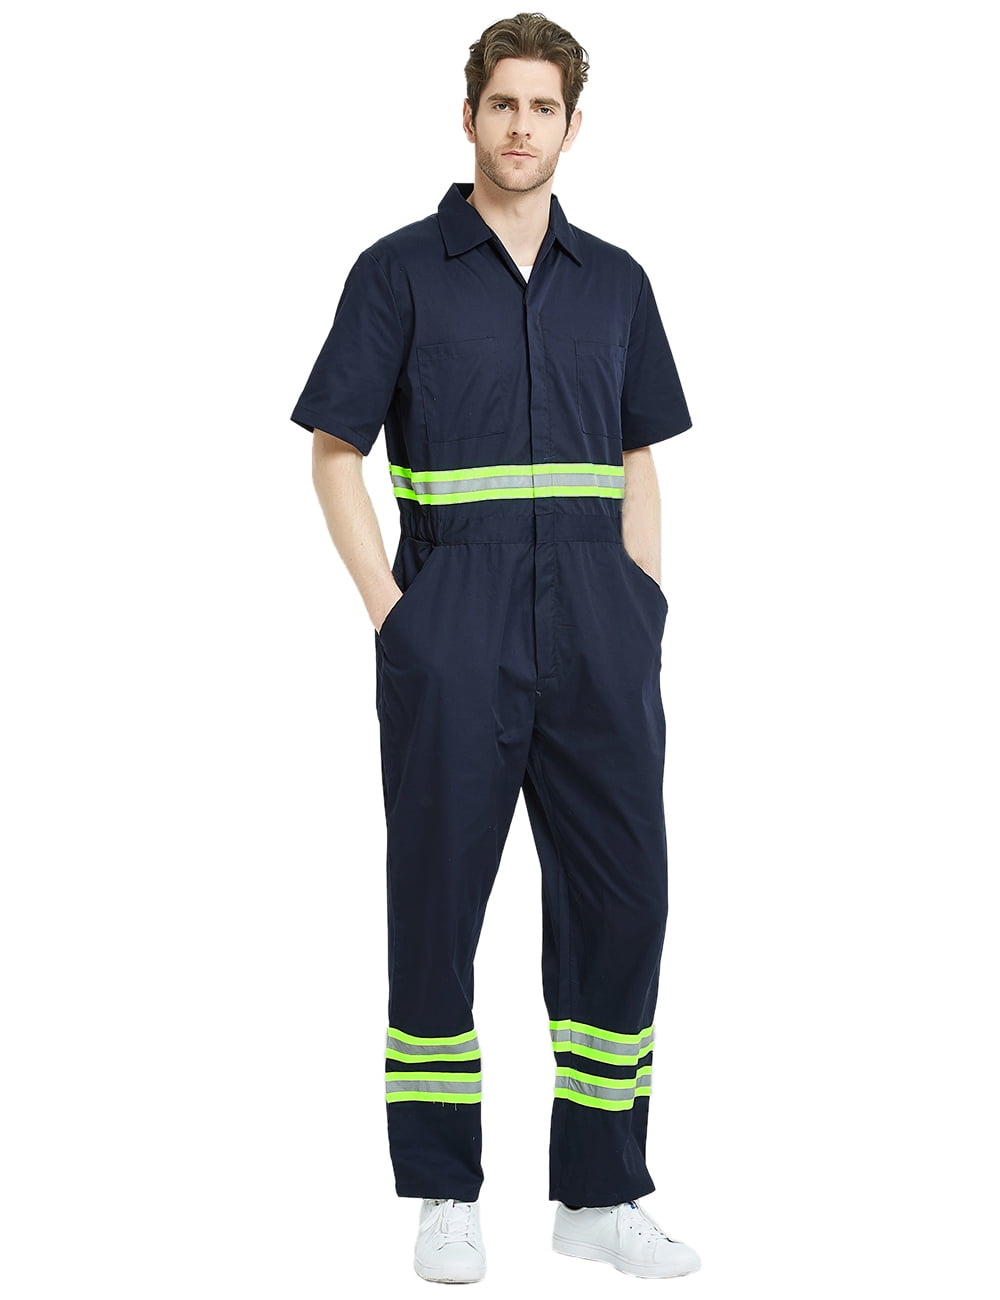 MENS ORANGE BOILER SUIT WORKWEAR MECHANIC COVERALL SAFETY PROTECTIVE REFLECTIVE 